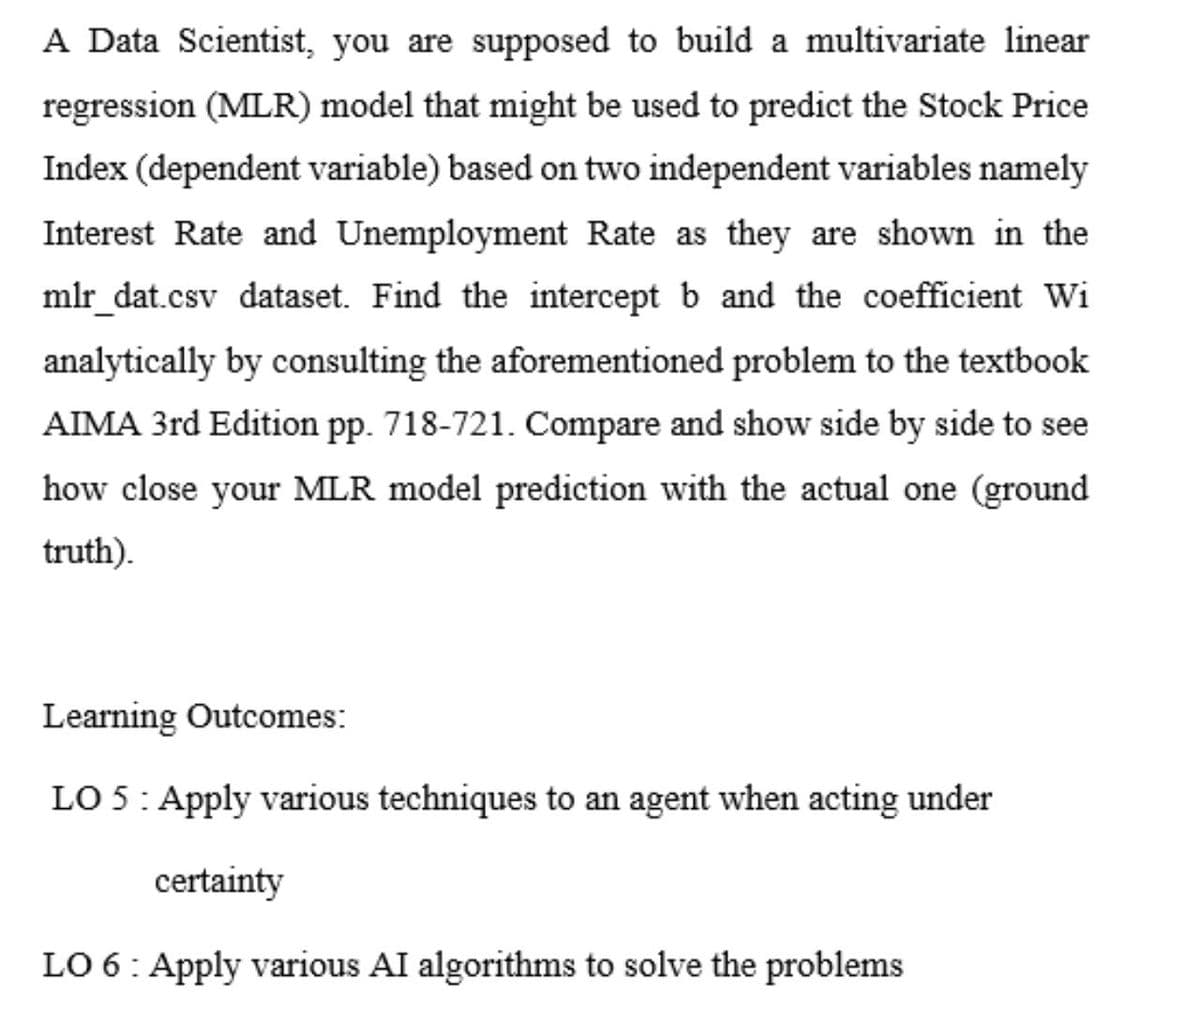 A Data Scientist, you are supposed to build a multivariate linear
regression (MLR) model that might be used to predict the Stock Price
Index (dependent variable) based on two independent variables namely
Interest Rate and Unemployment Rate as they are shown in the
mlr dat.csv dataset. Find the intercept b and the coefficient Wi
analytically by consulting the aforementioned problem to the textbook
AIMA 3rd Edition pp. 718-721. Compare and show side by side to see
how close your MLR model prediction with the actual one (ground
truth).
Learning Outcomes:
LO 5: Apply various techniques to an agent when acting under
certainty
LO 6: Apply various AI algorithms to solve the problems
